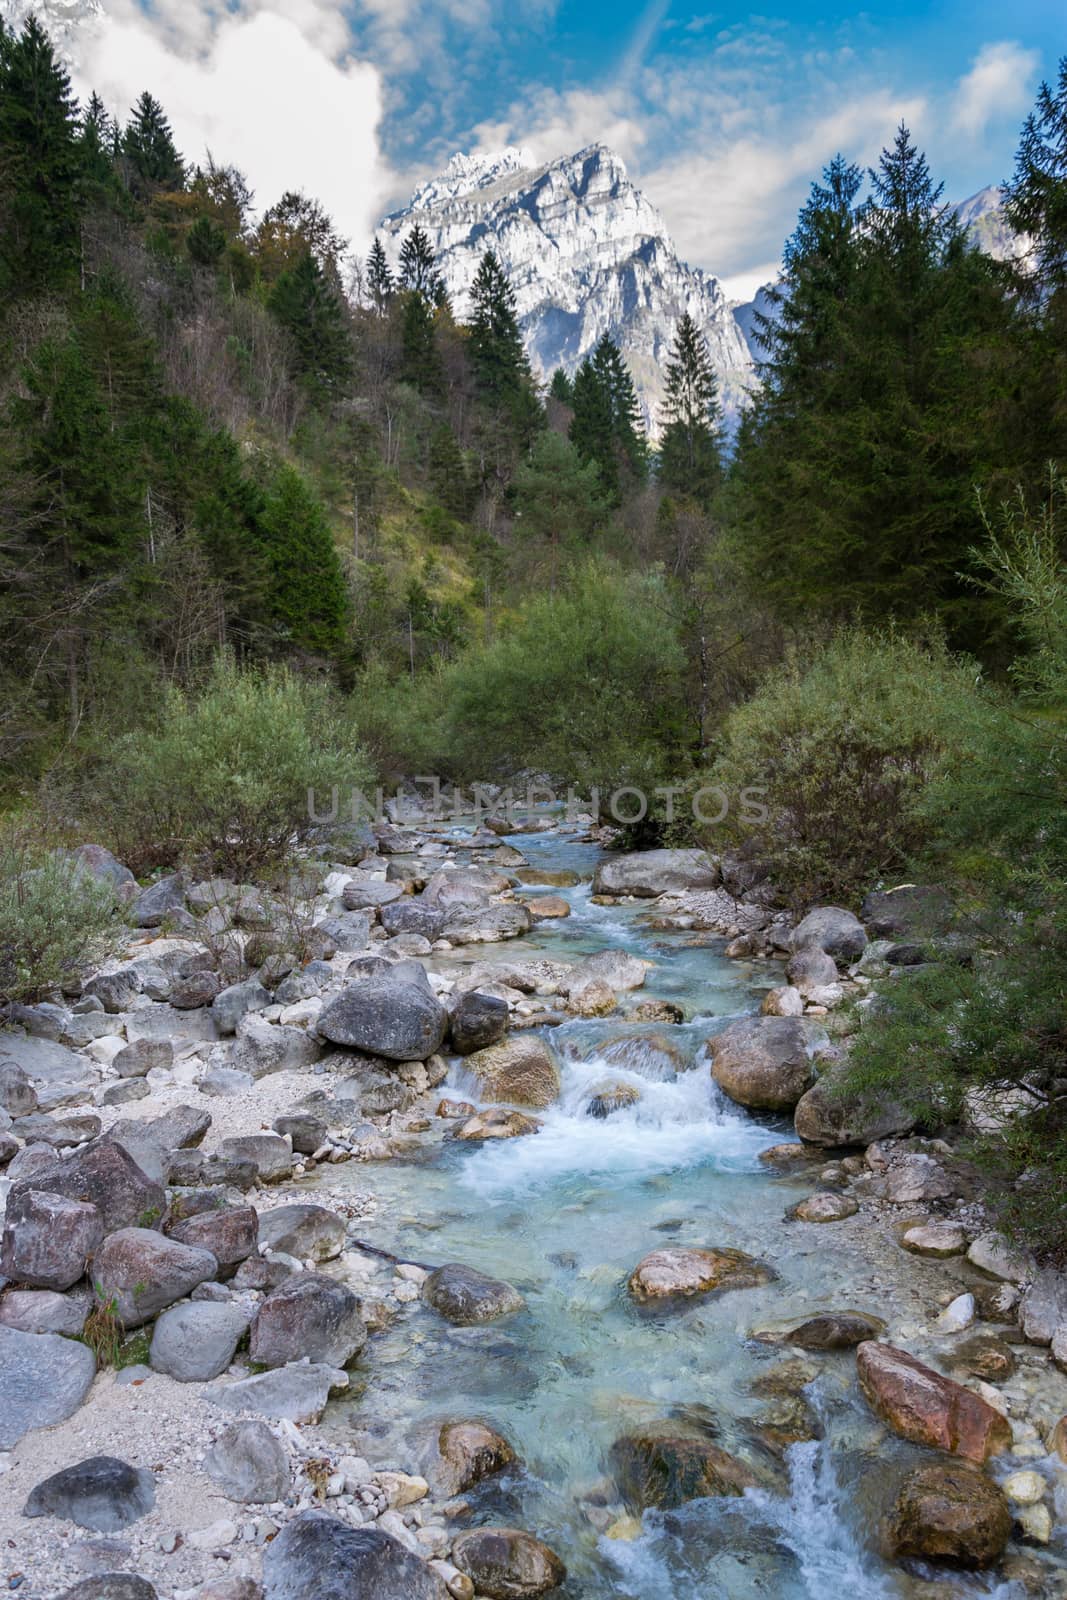 Alpine torrent with a mountain in the background